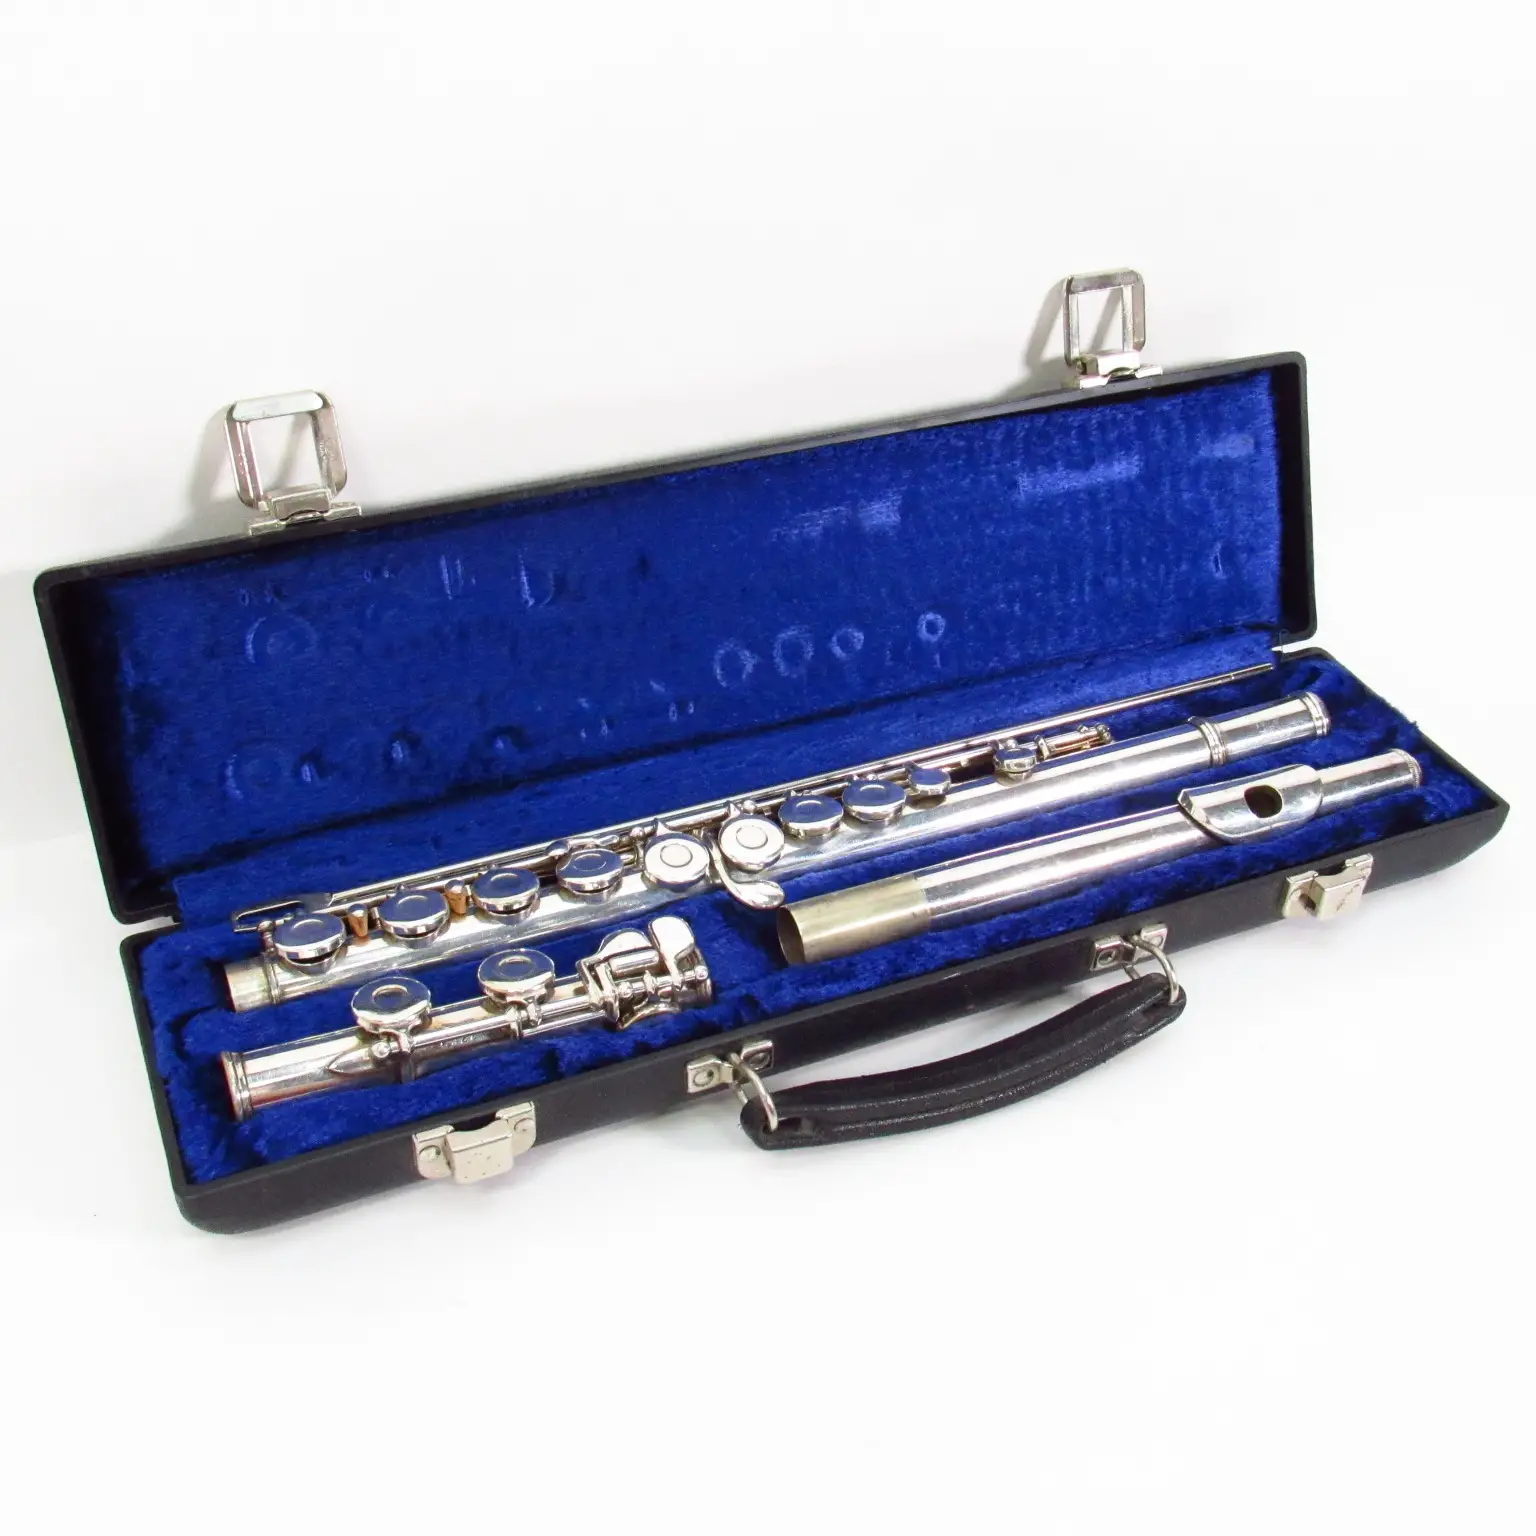 Price of flute in Netherlands